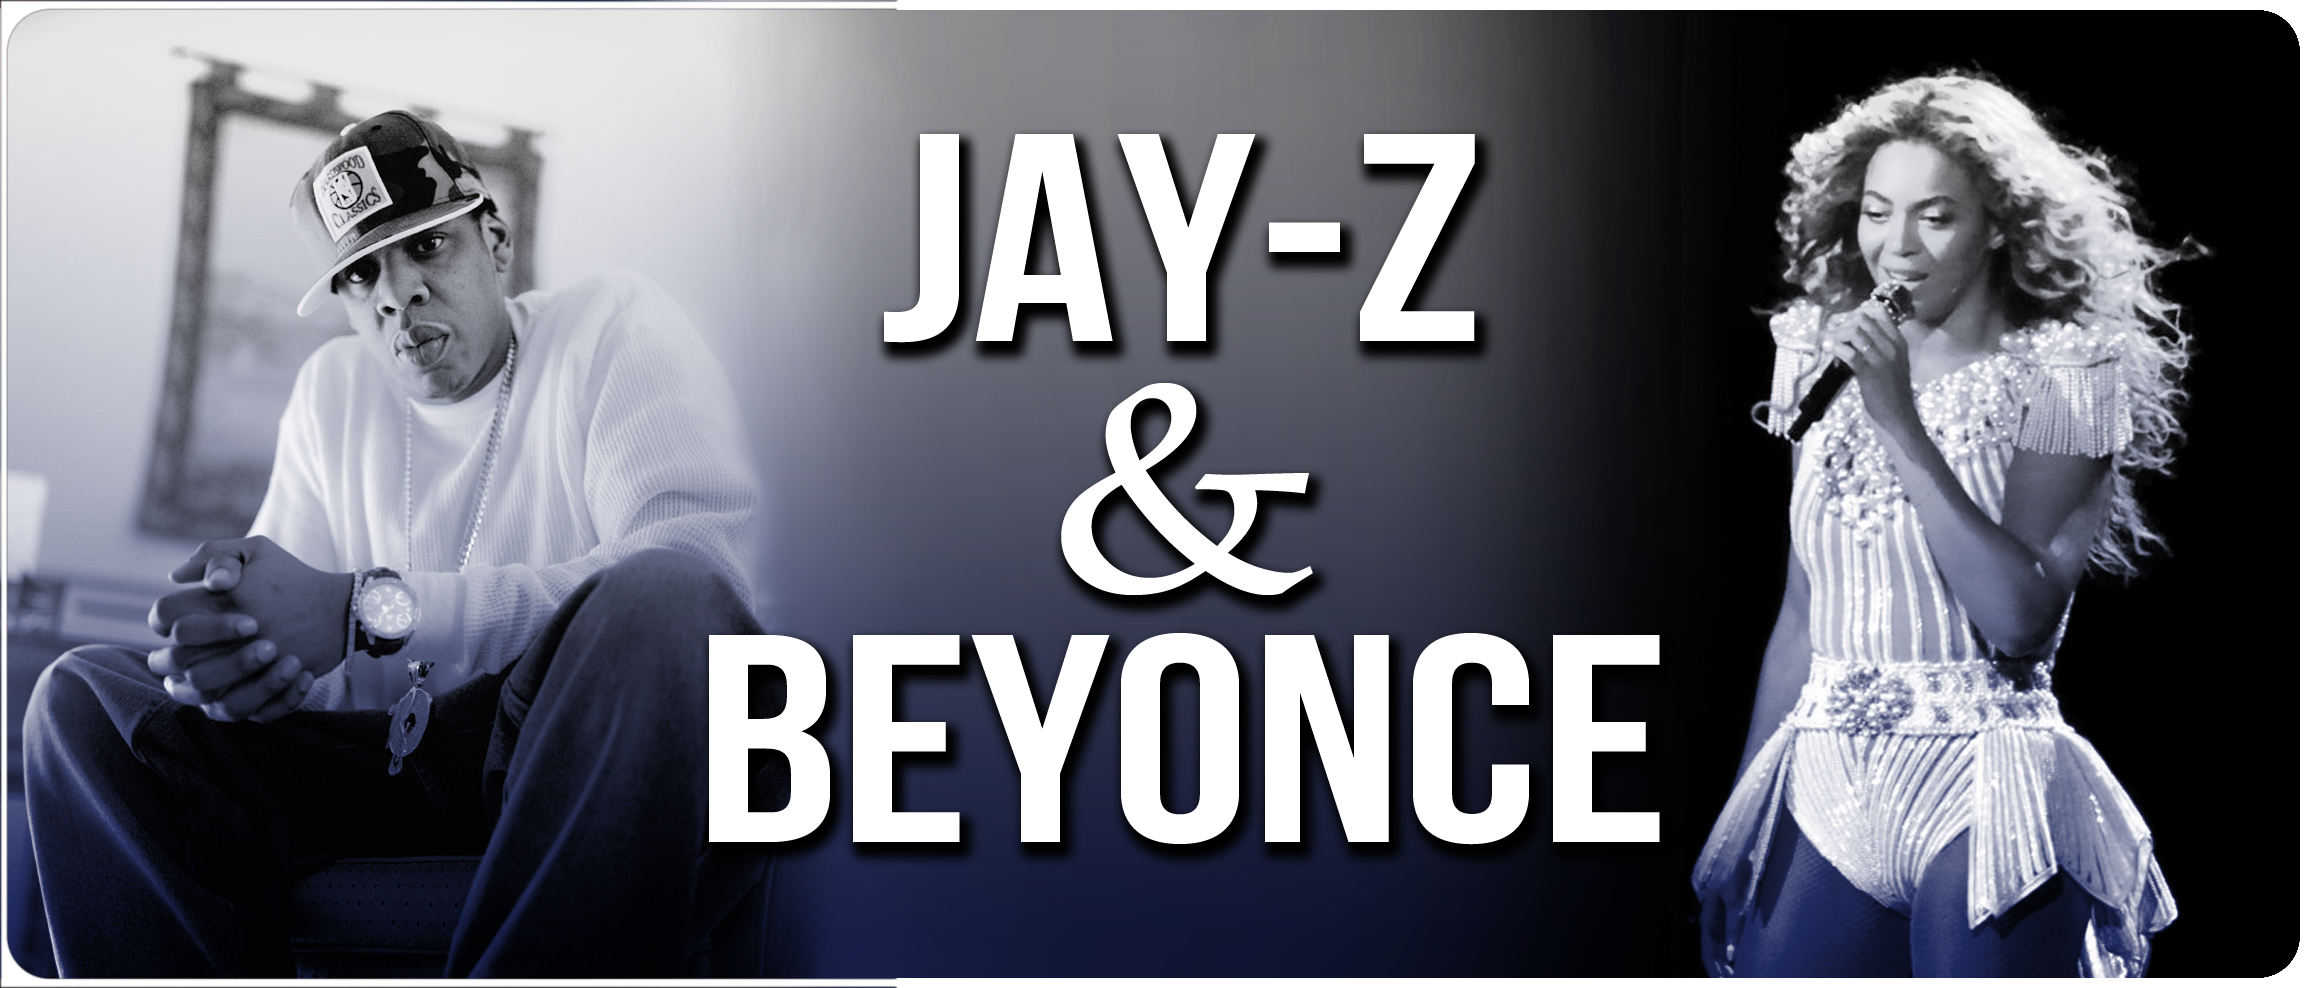 Beyonce & JayZ Tickets in Toronto at Rogers Centre Ticket Down